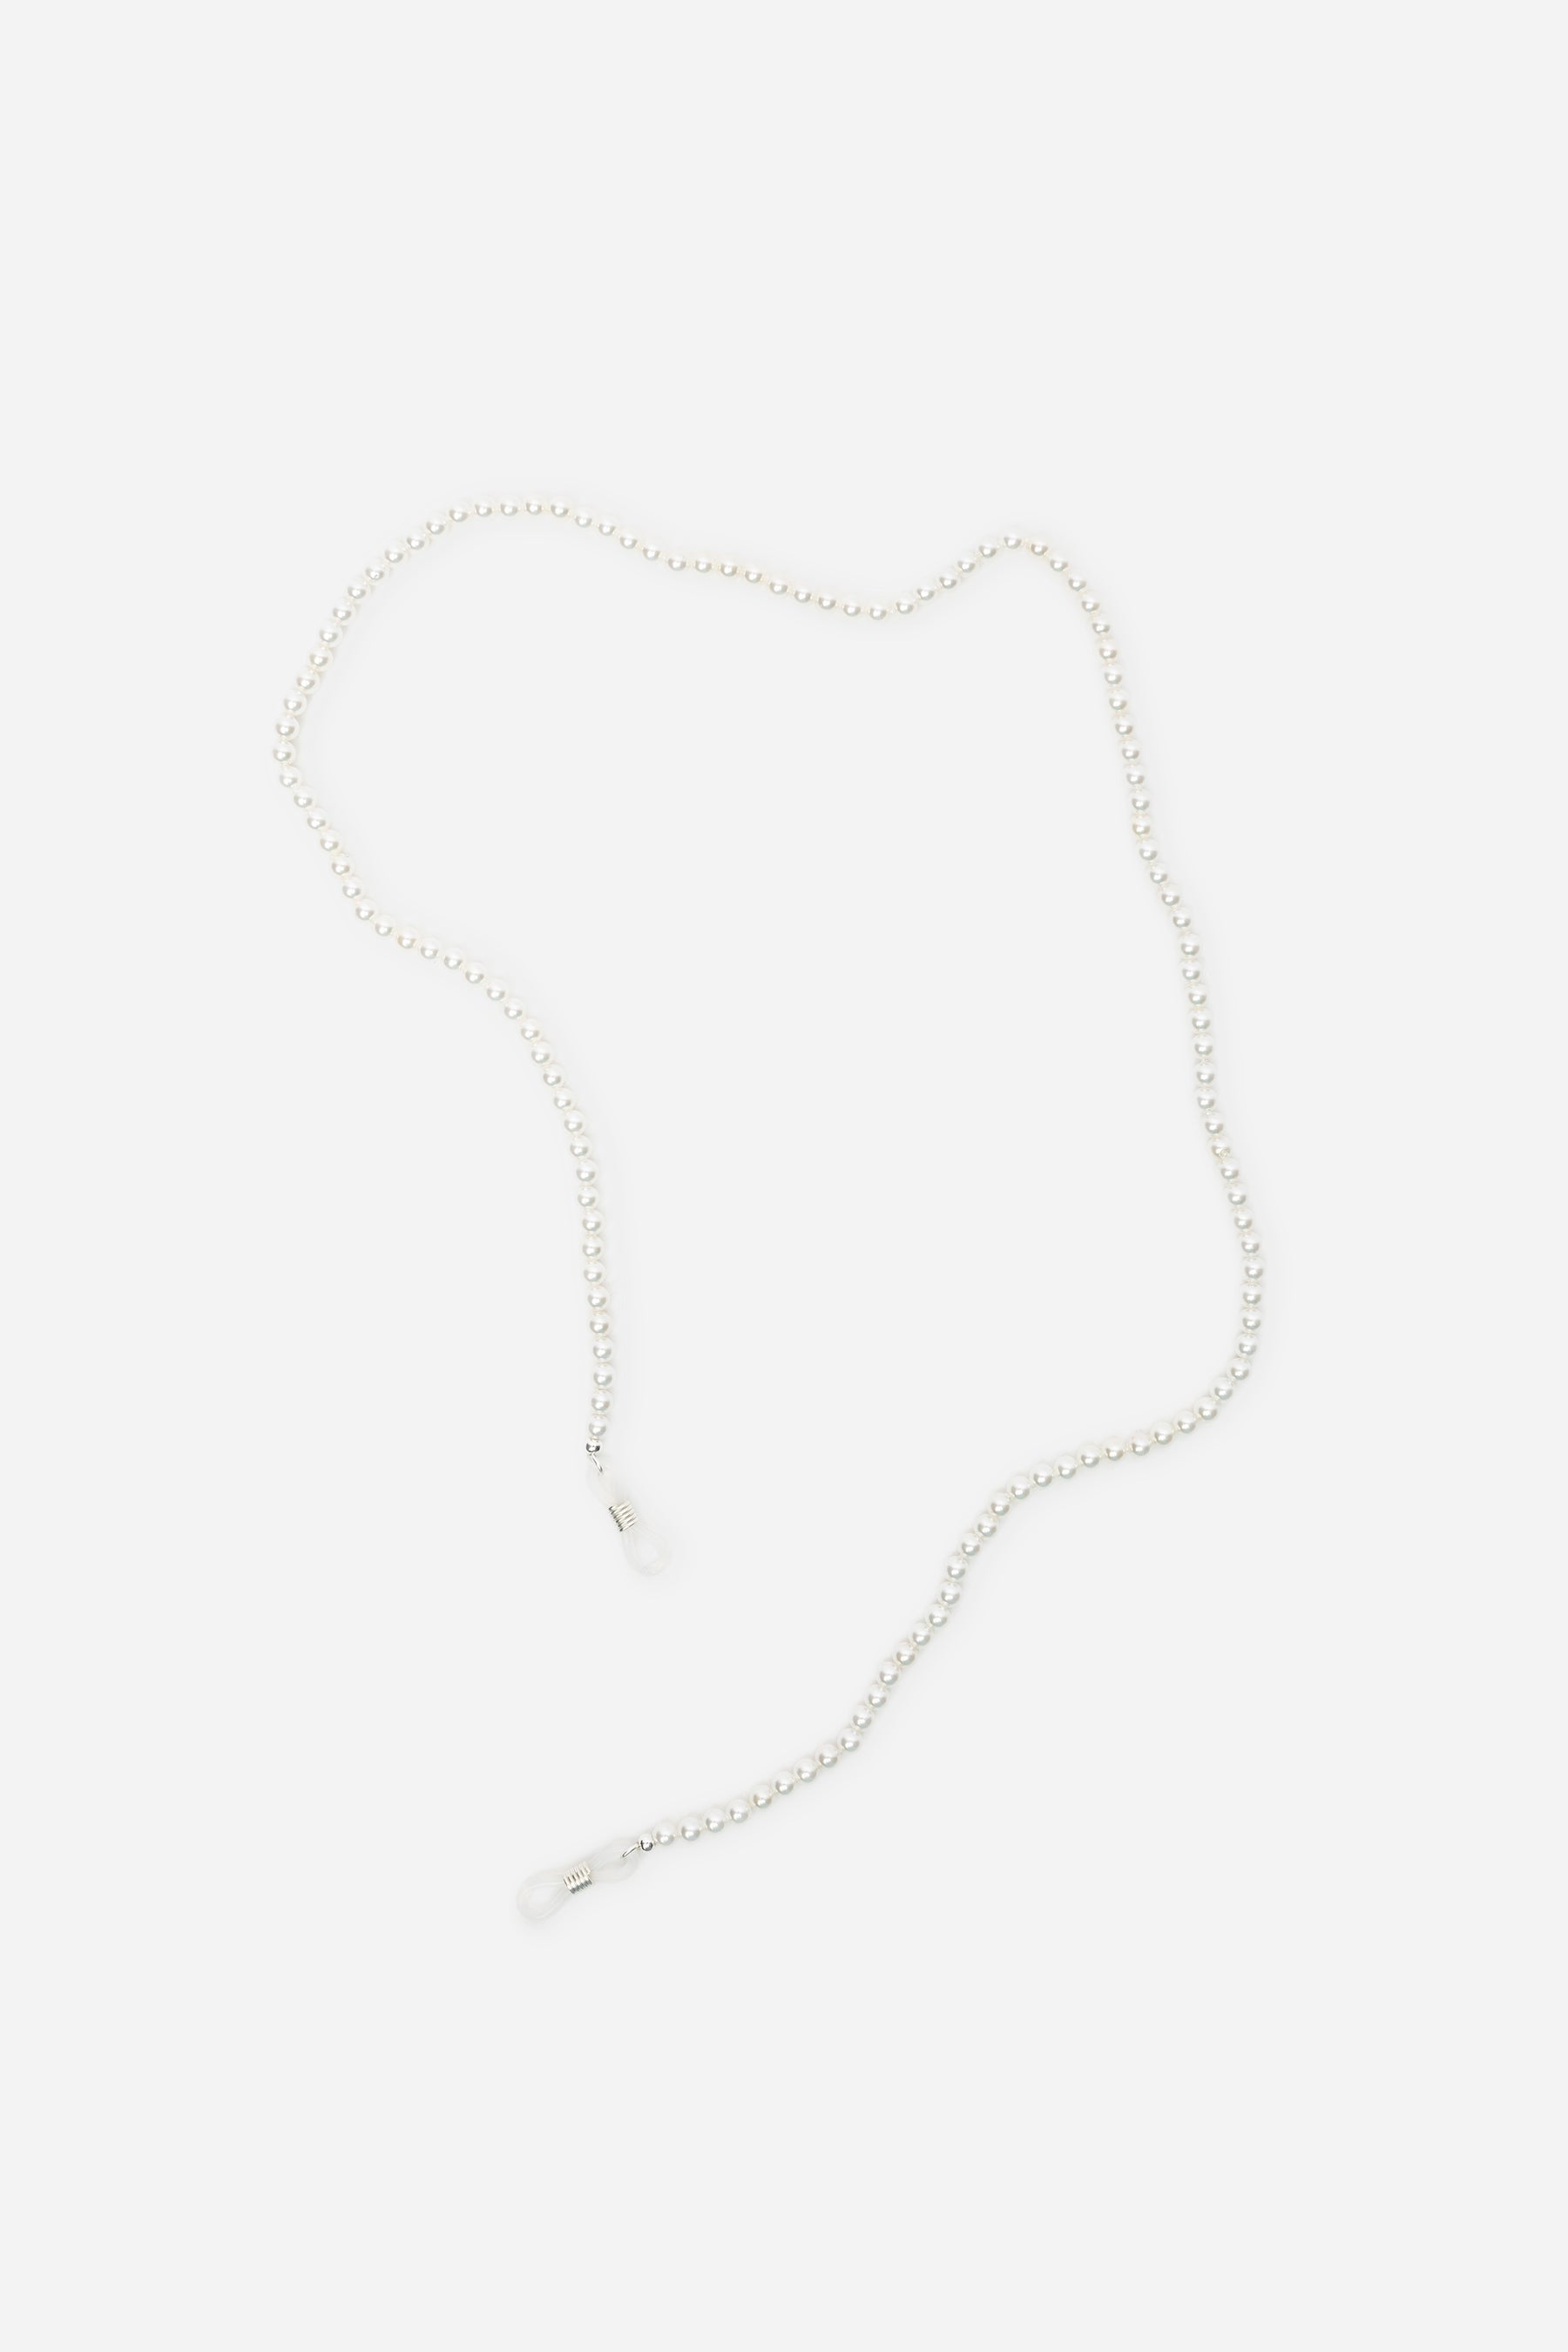 Sorelle ApS Simple sunglass chain Anklet Sterling Silver